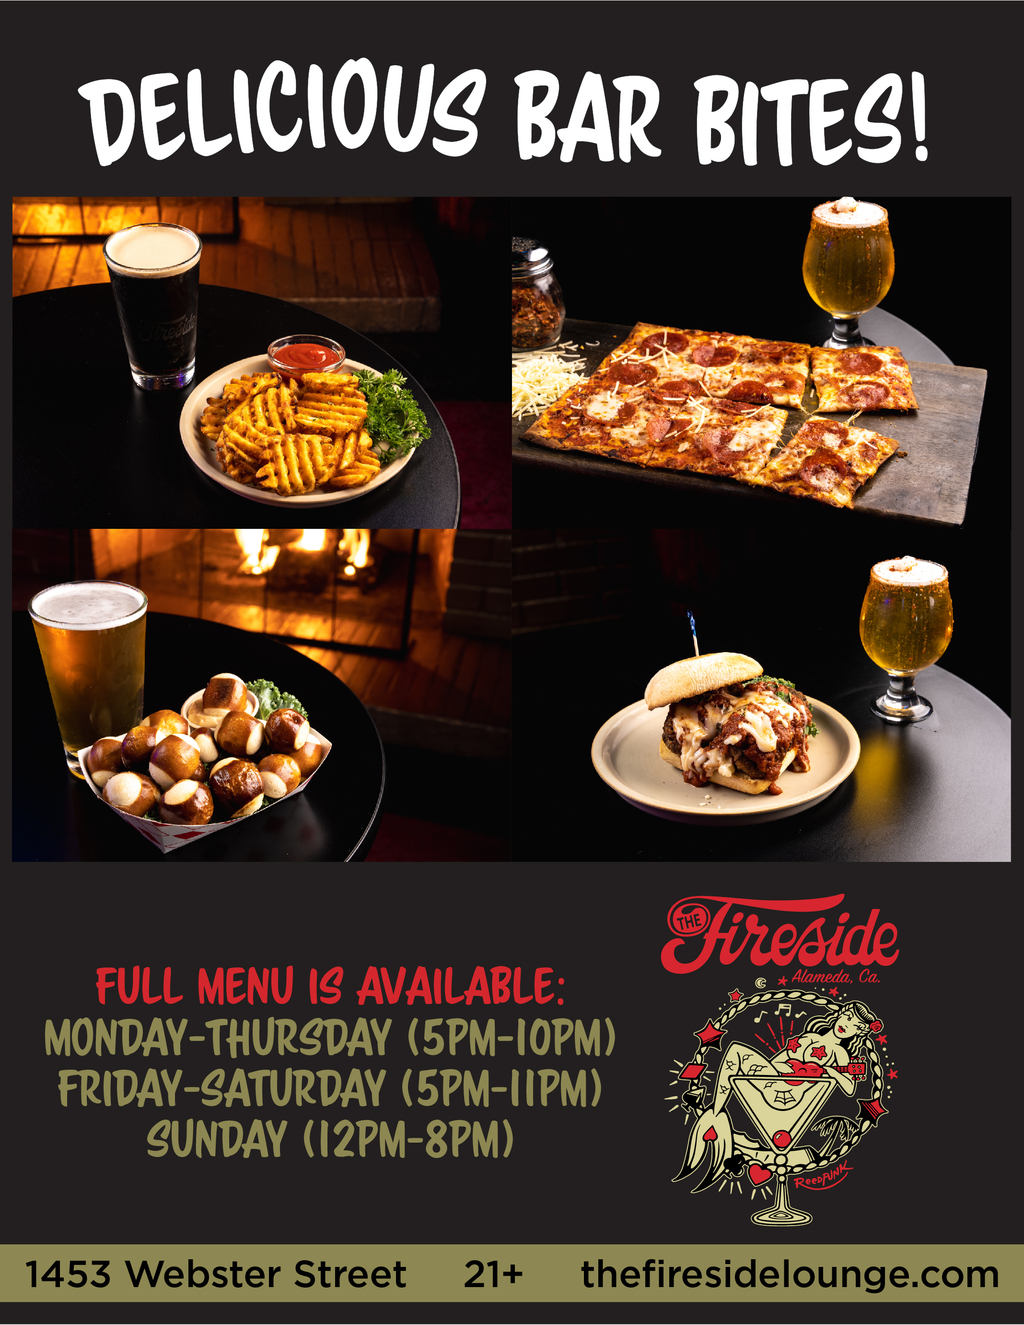 The Fireside Lounge Indulge in Delicious Bar Bites at The Fireside Lounge promotion flier on Digifli com